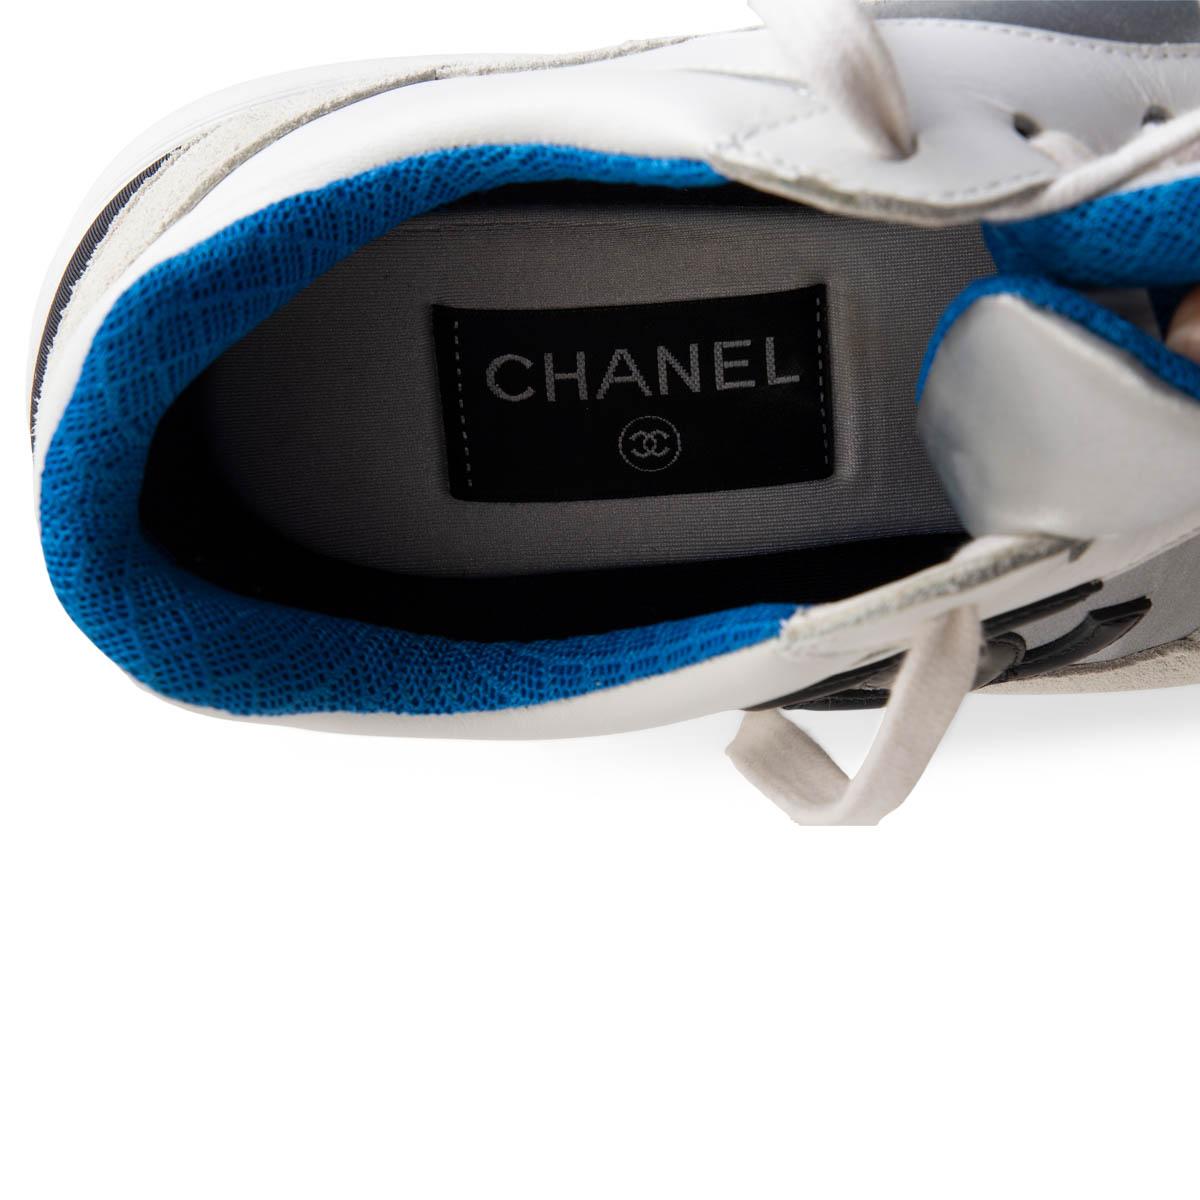 CHANEL white silver blue leather 2018 18S LOW TOP Sneakers Shoes 